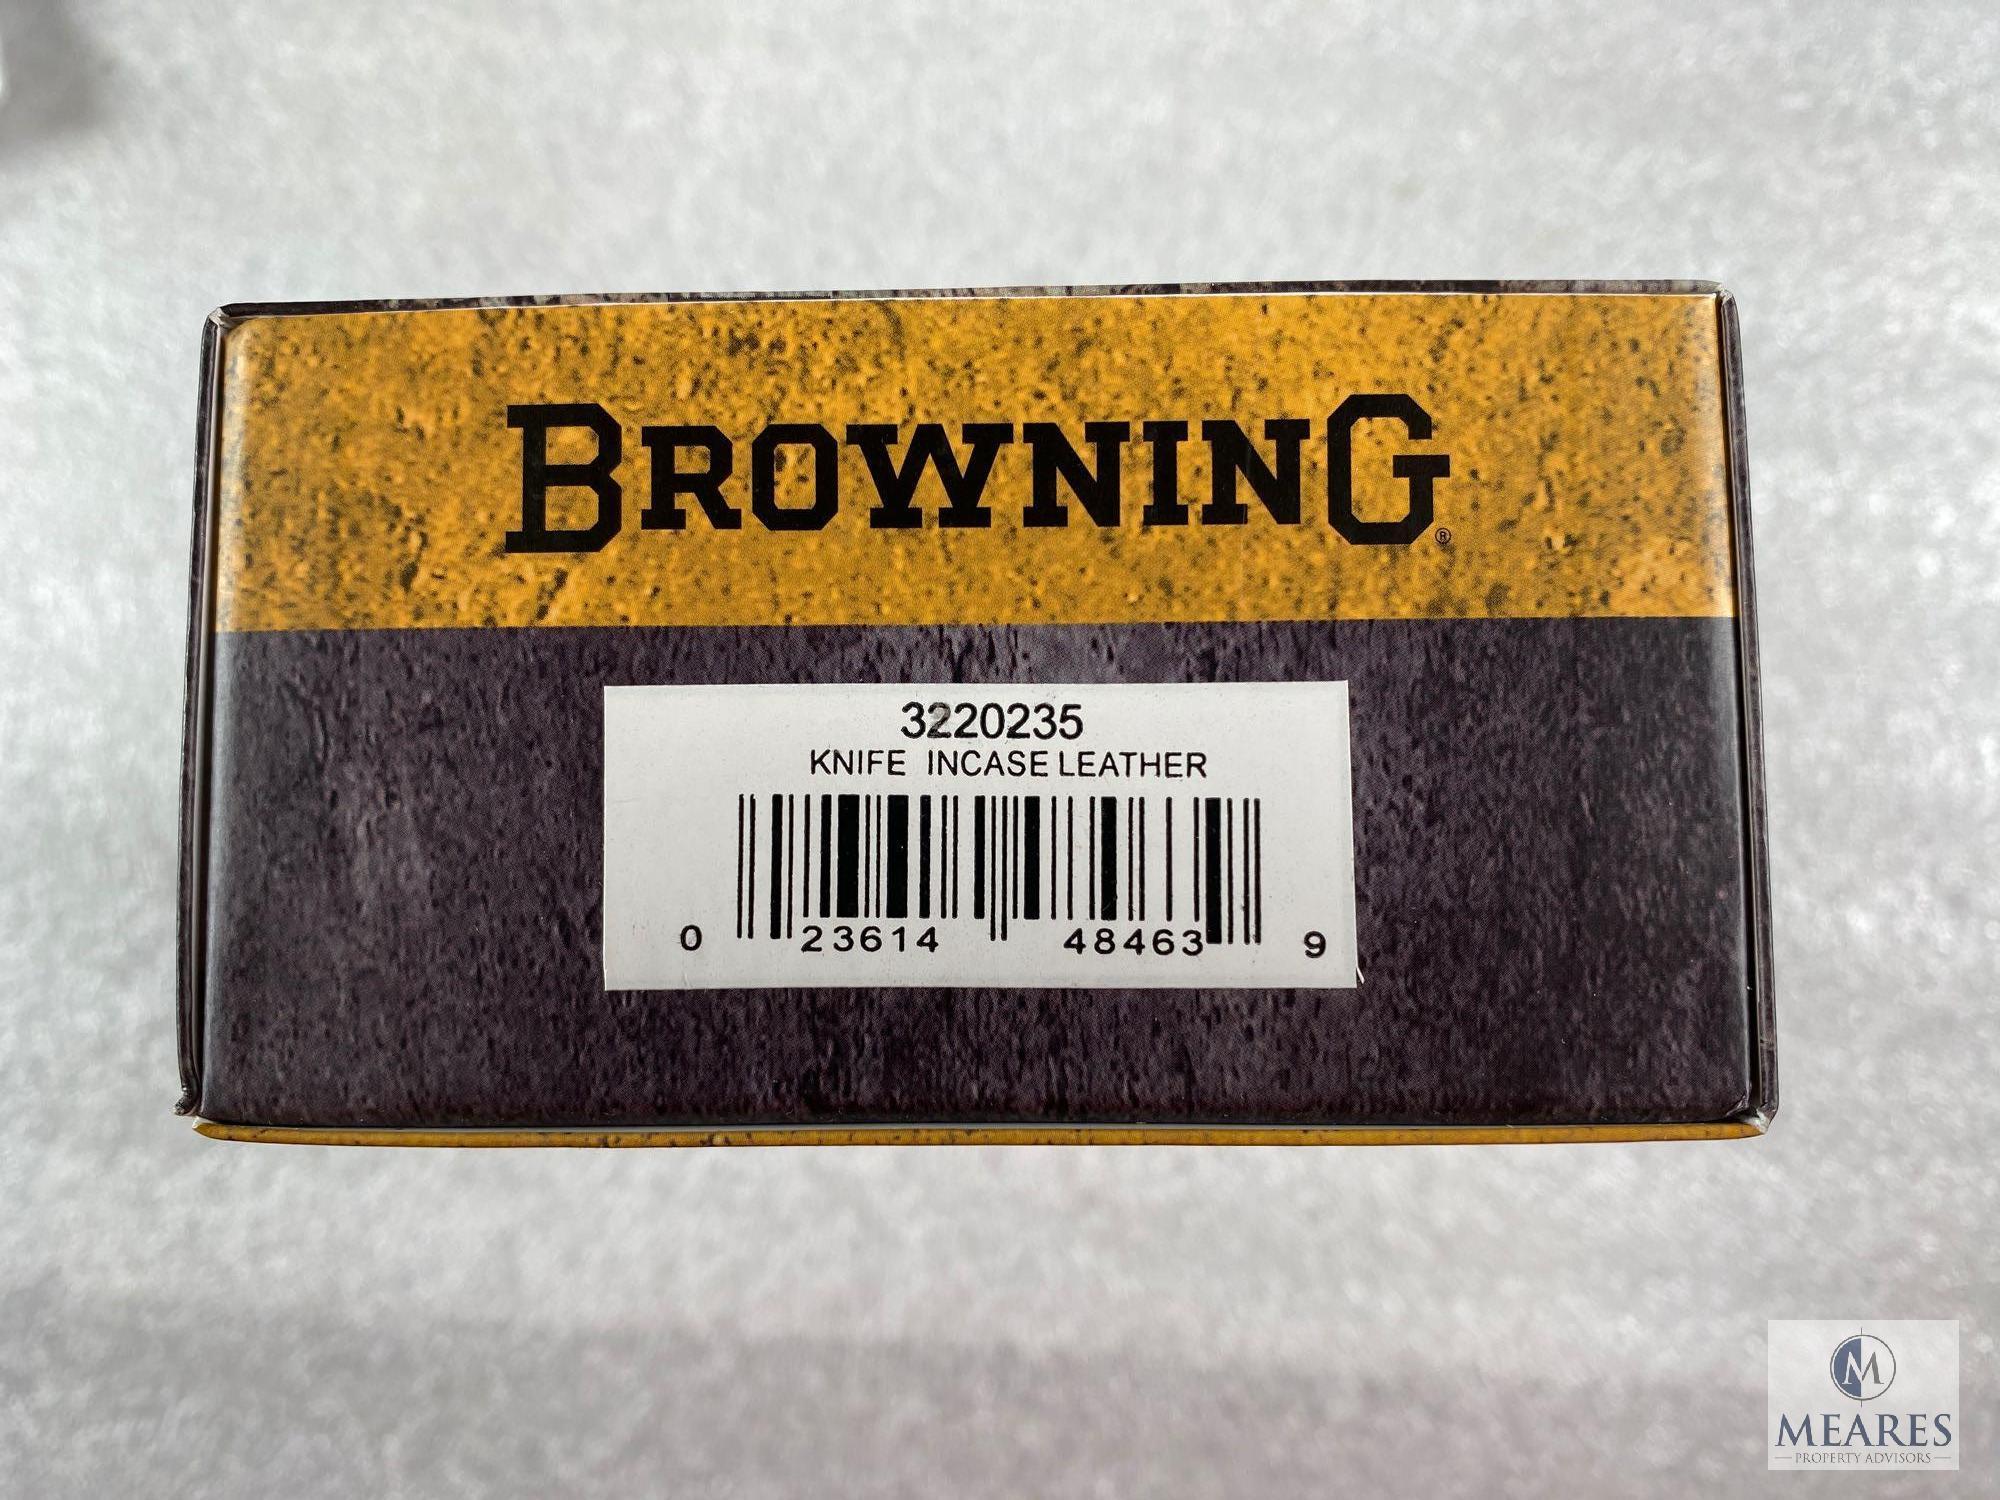 NEW - Browning 8" Knife with Leather Carrying Case